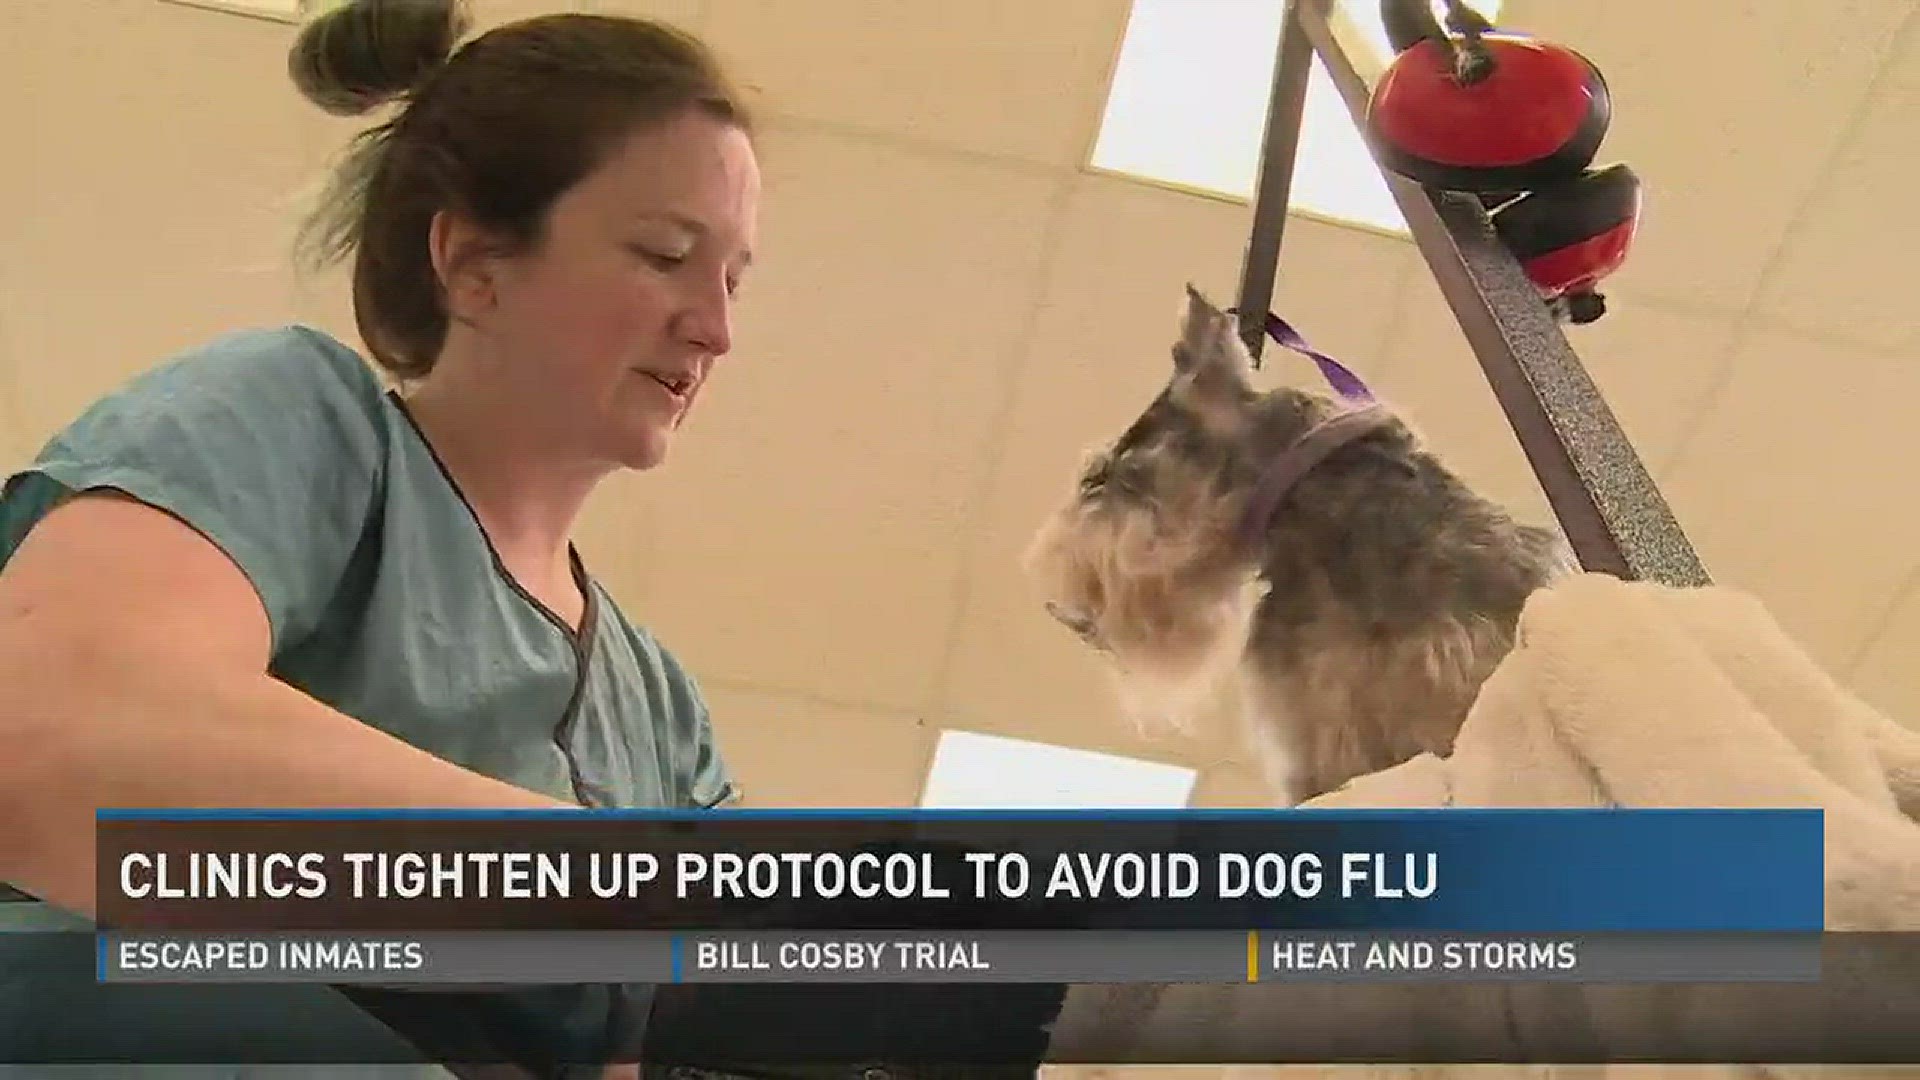 Area pet hospitals have administered dozens of vaccines since last week.